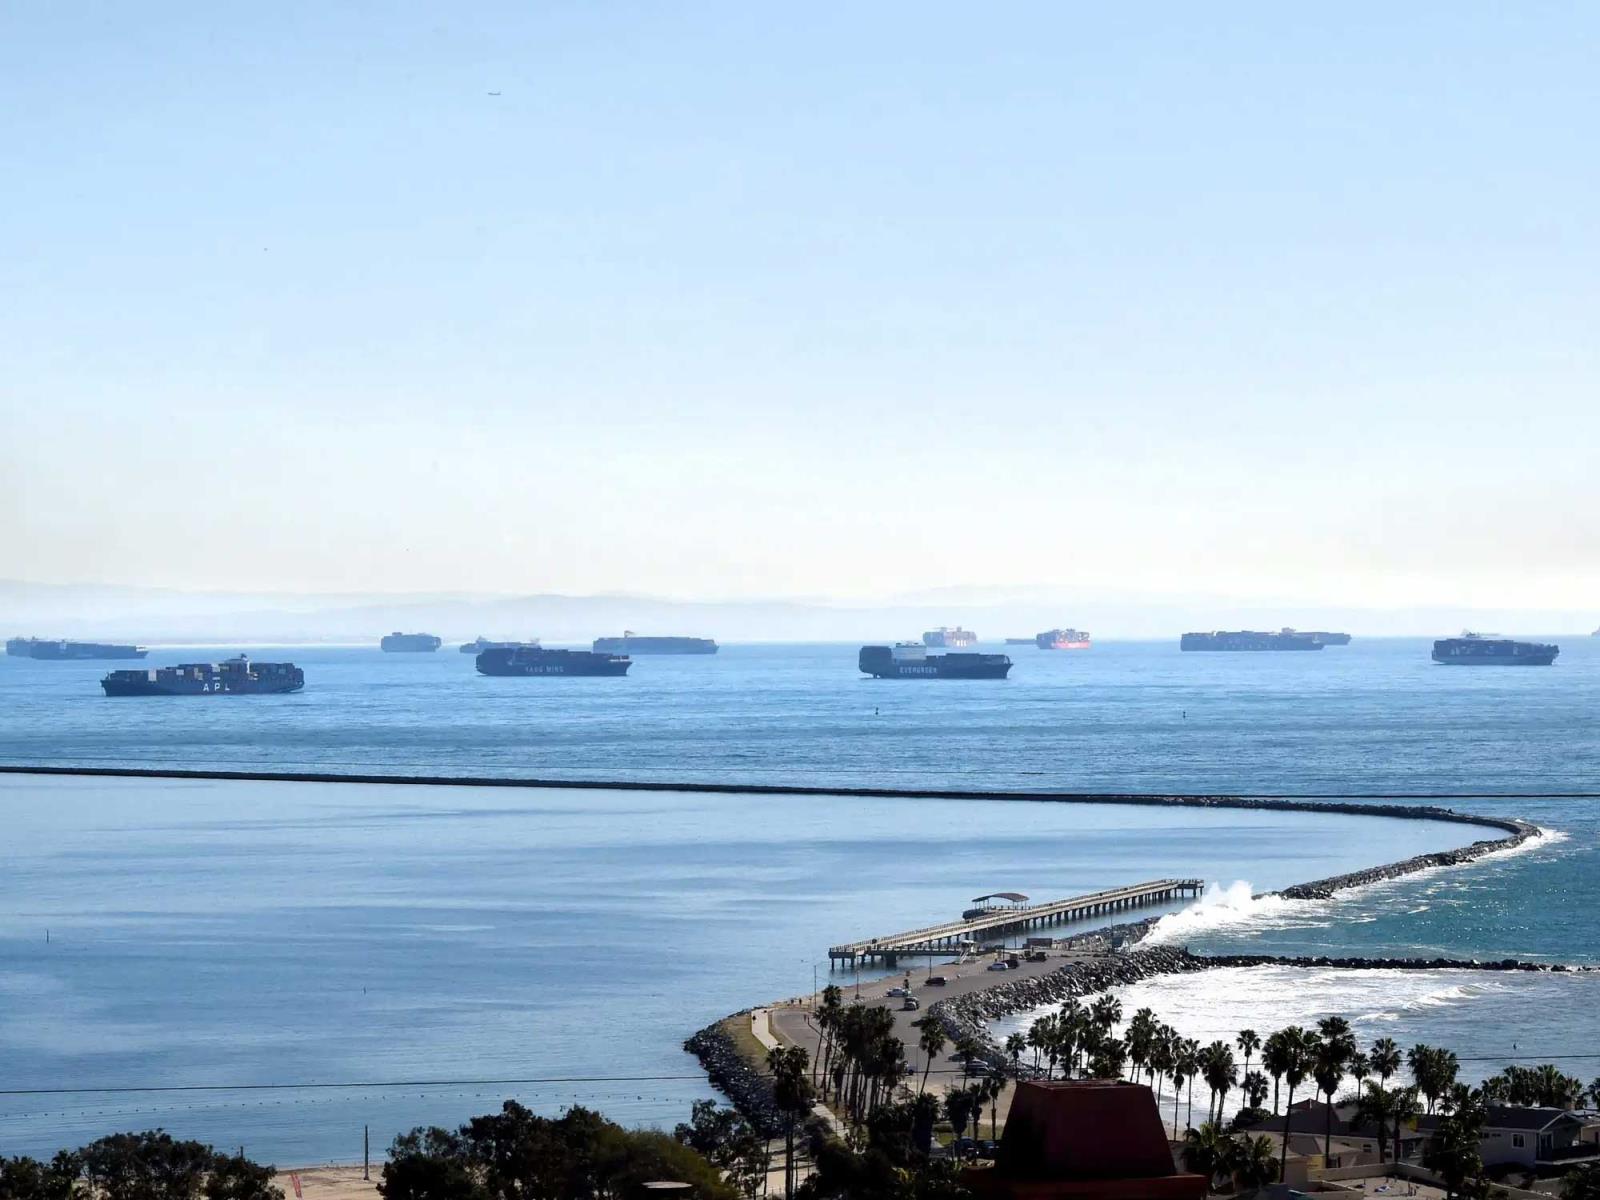 A-record-breaking-44-container-ships-are-stuck-off-the-coast-of-California.jpg